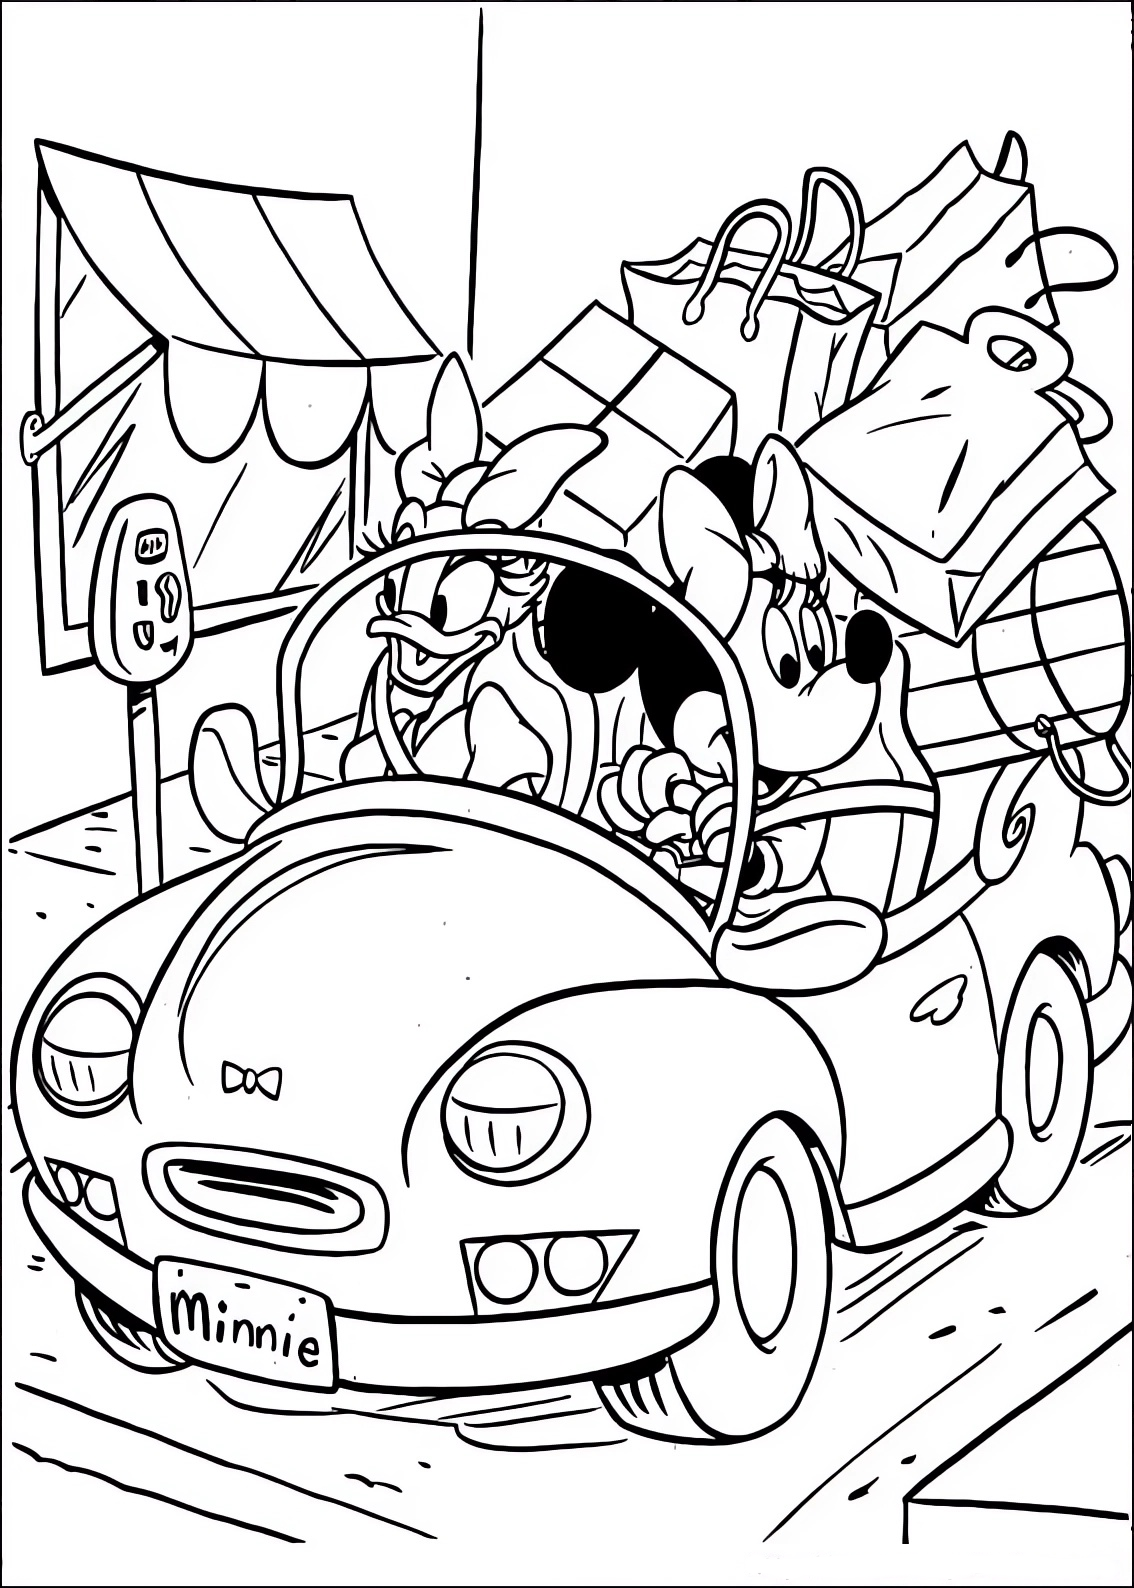 Coloring page of Minnie and Daisy Daisy in the car going shopping